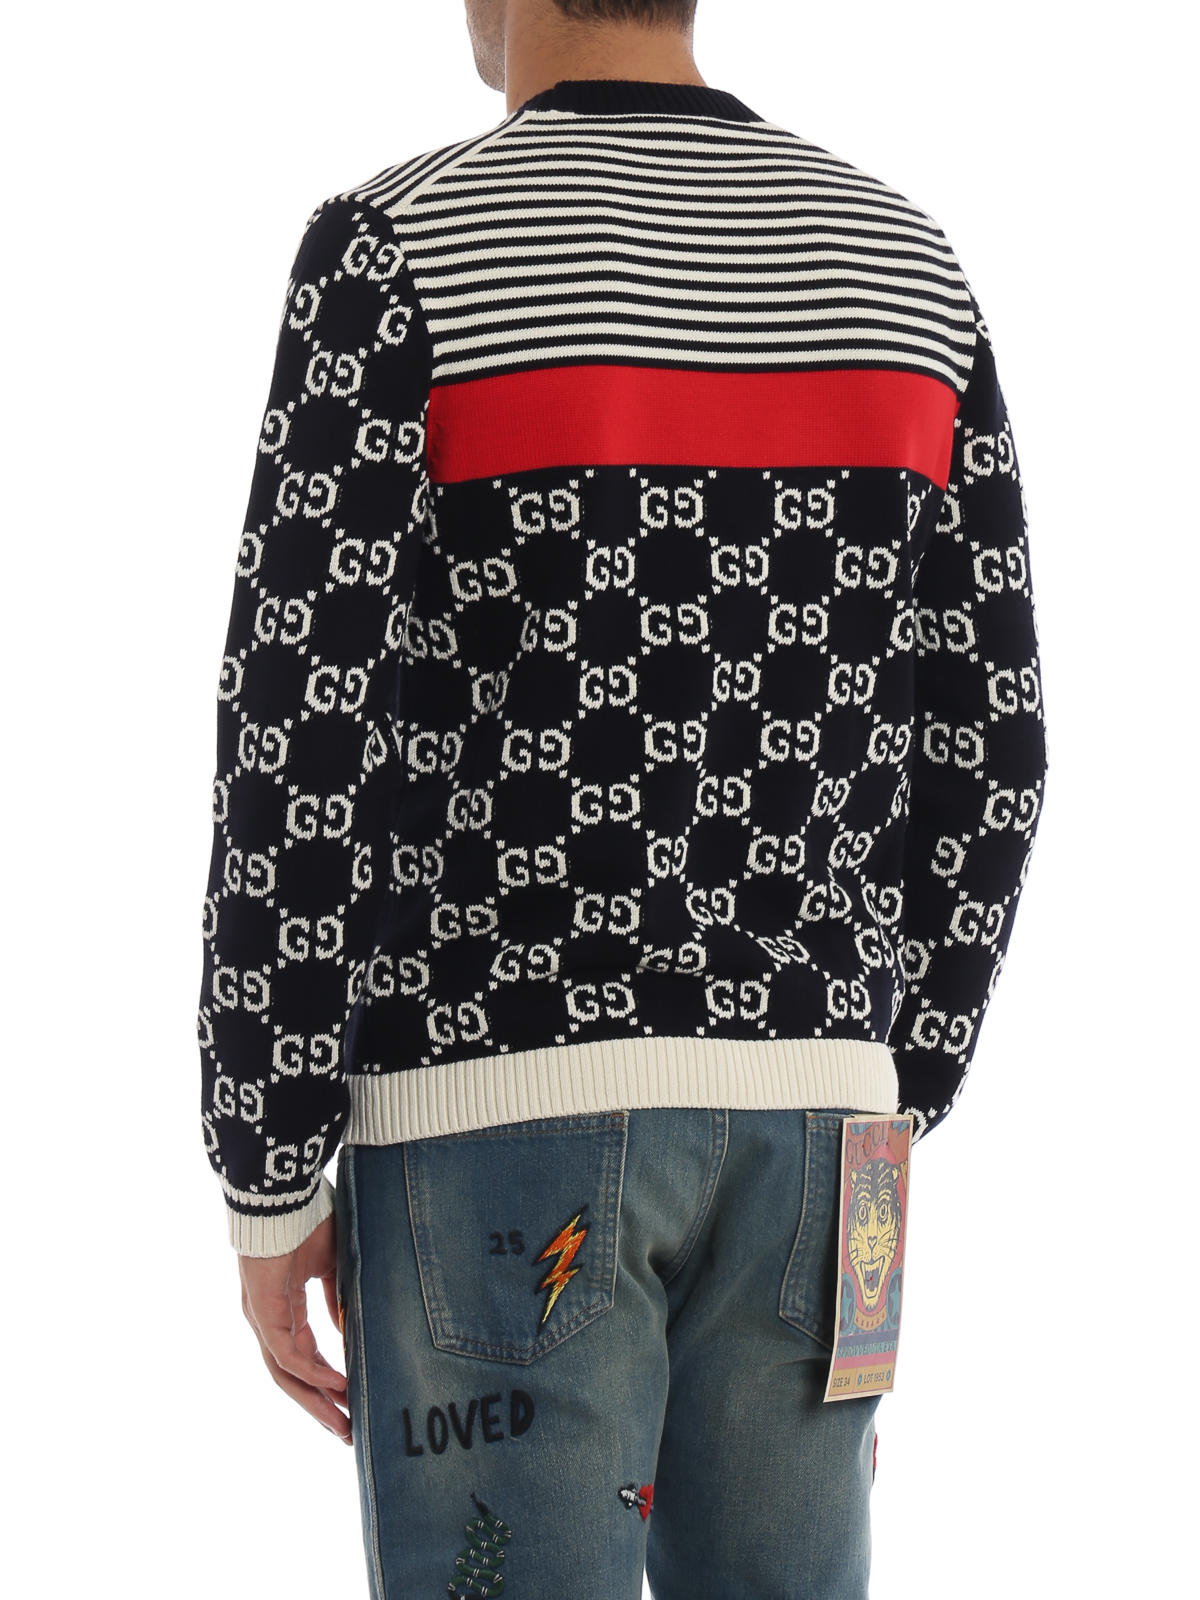 GG and stripes knitted cotton crewneck 